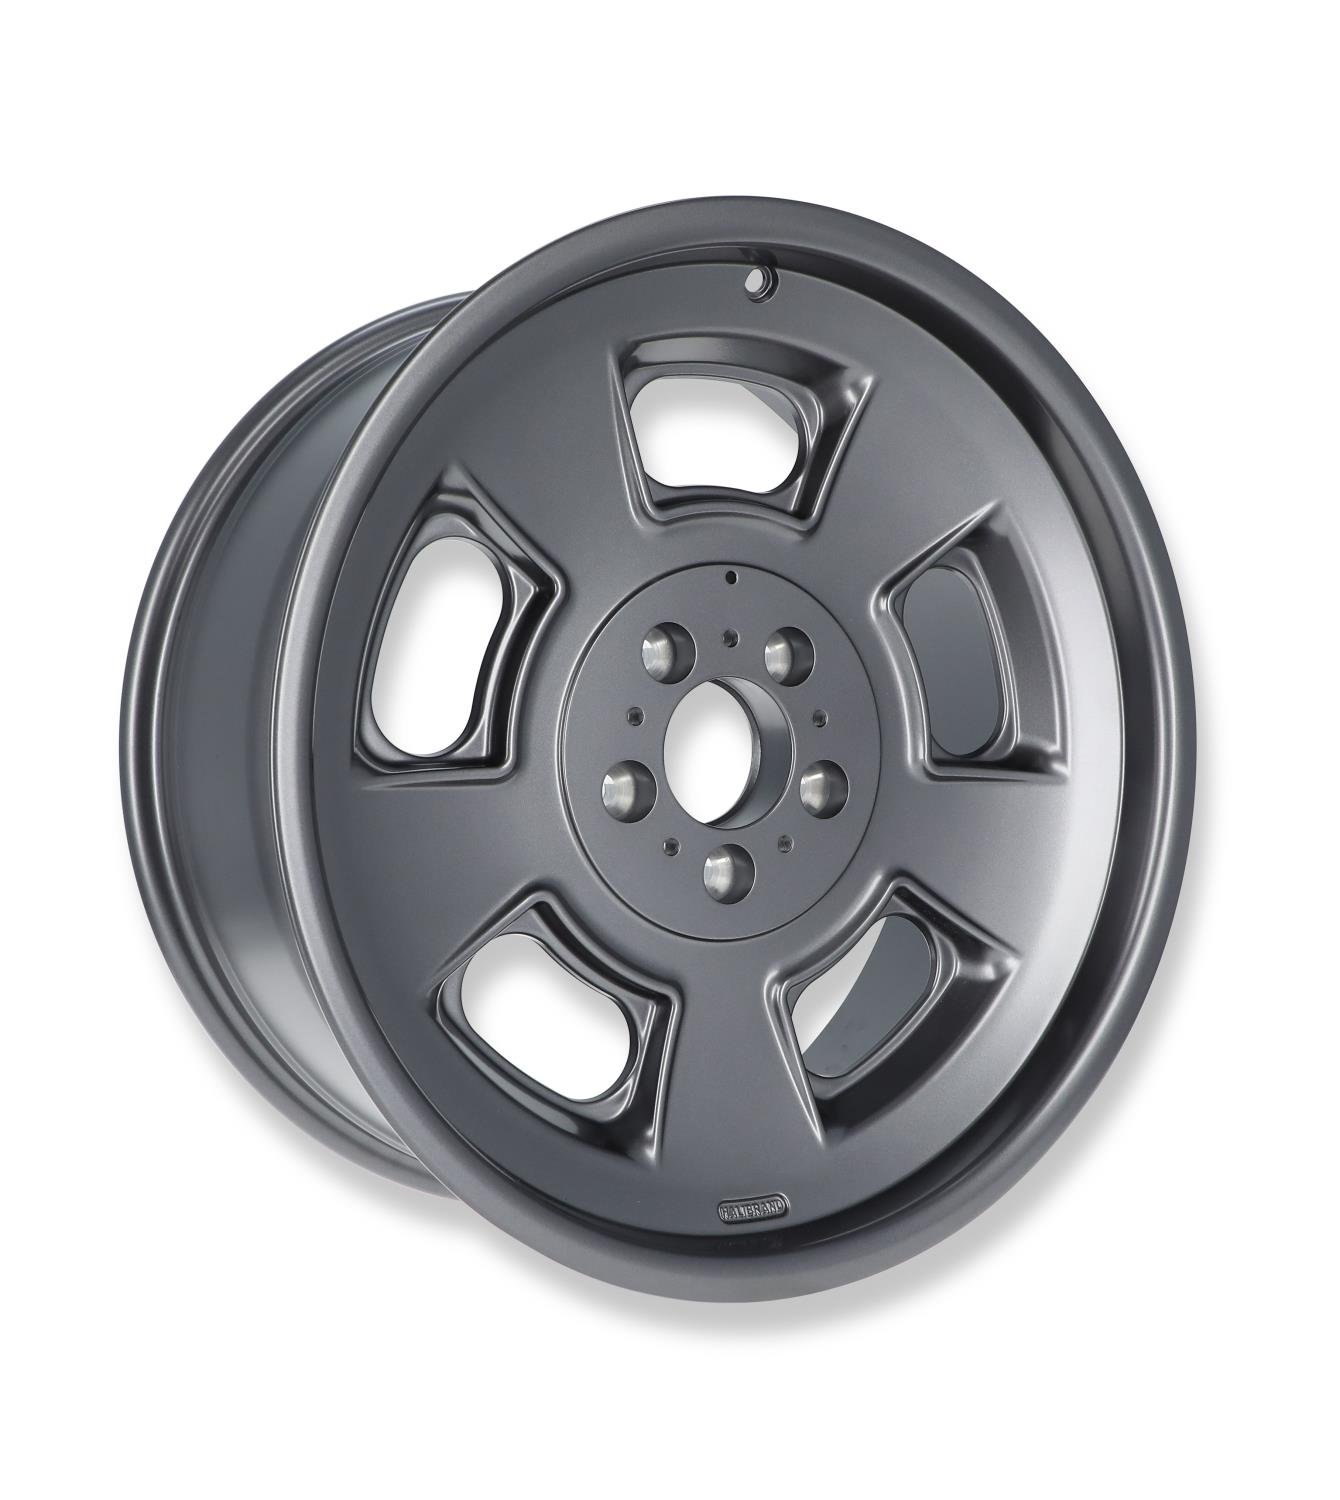 Sprint Front Wheel, Size: 20x8.5", Bolt Pattern: 5x5", Backspace: 5.25" [Anthracite - Semi Gloss Clearcoat]